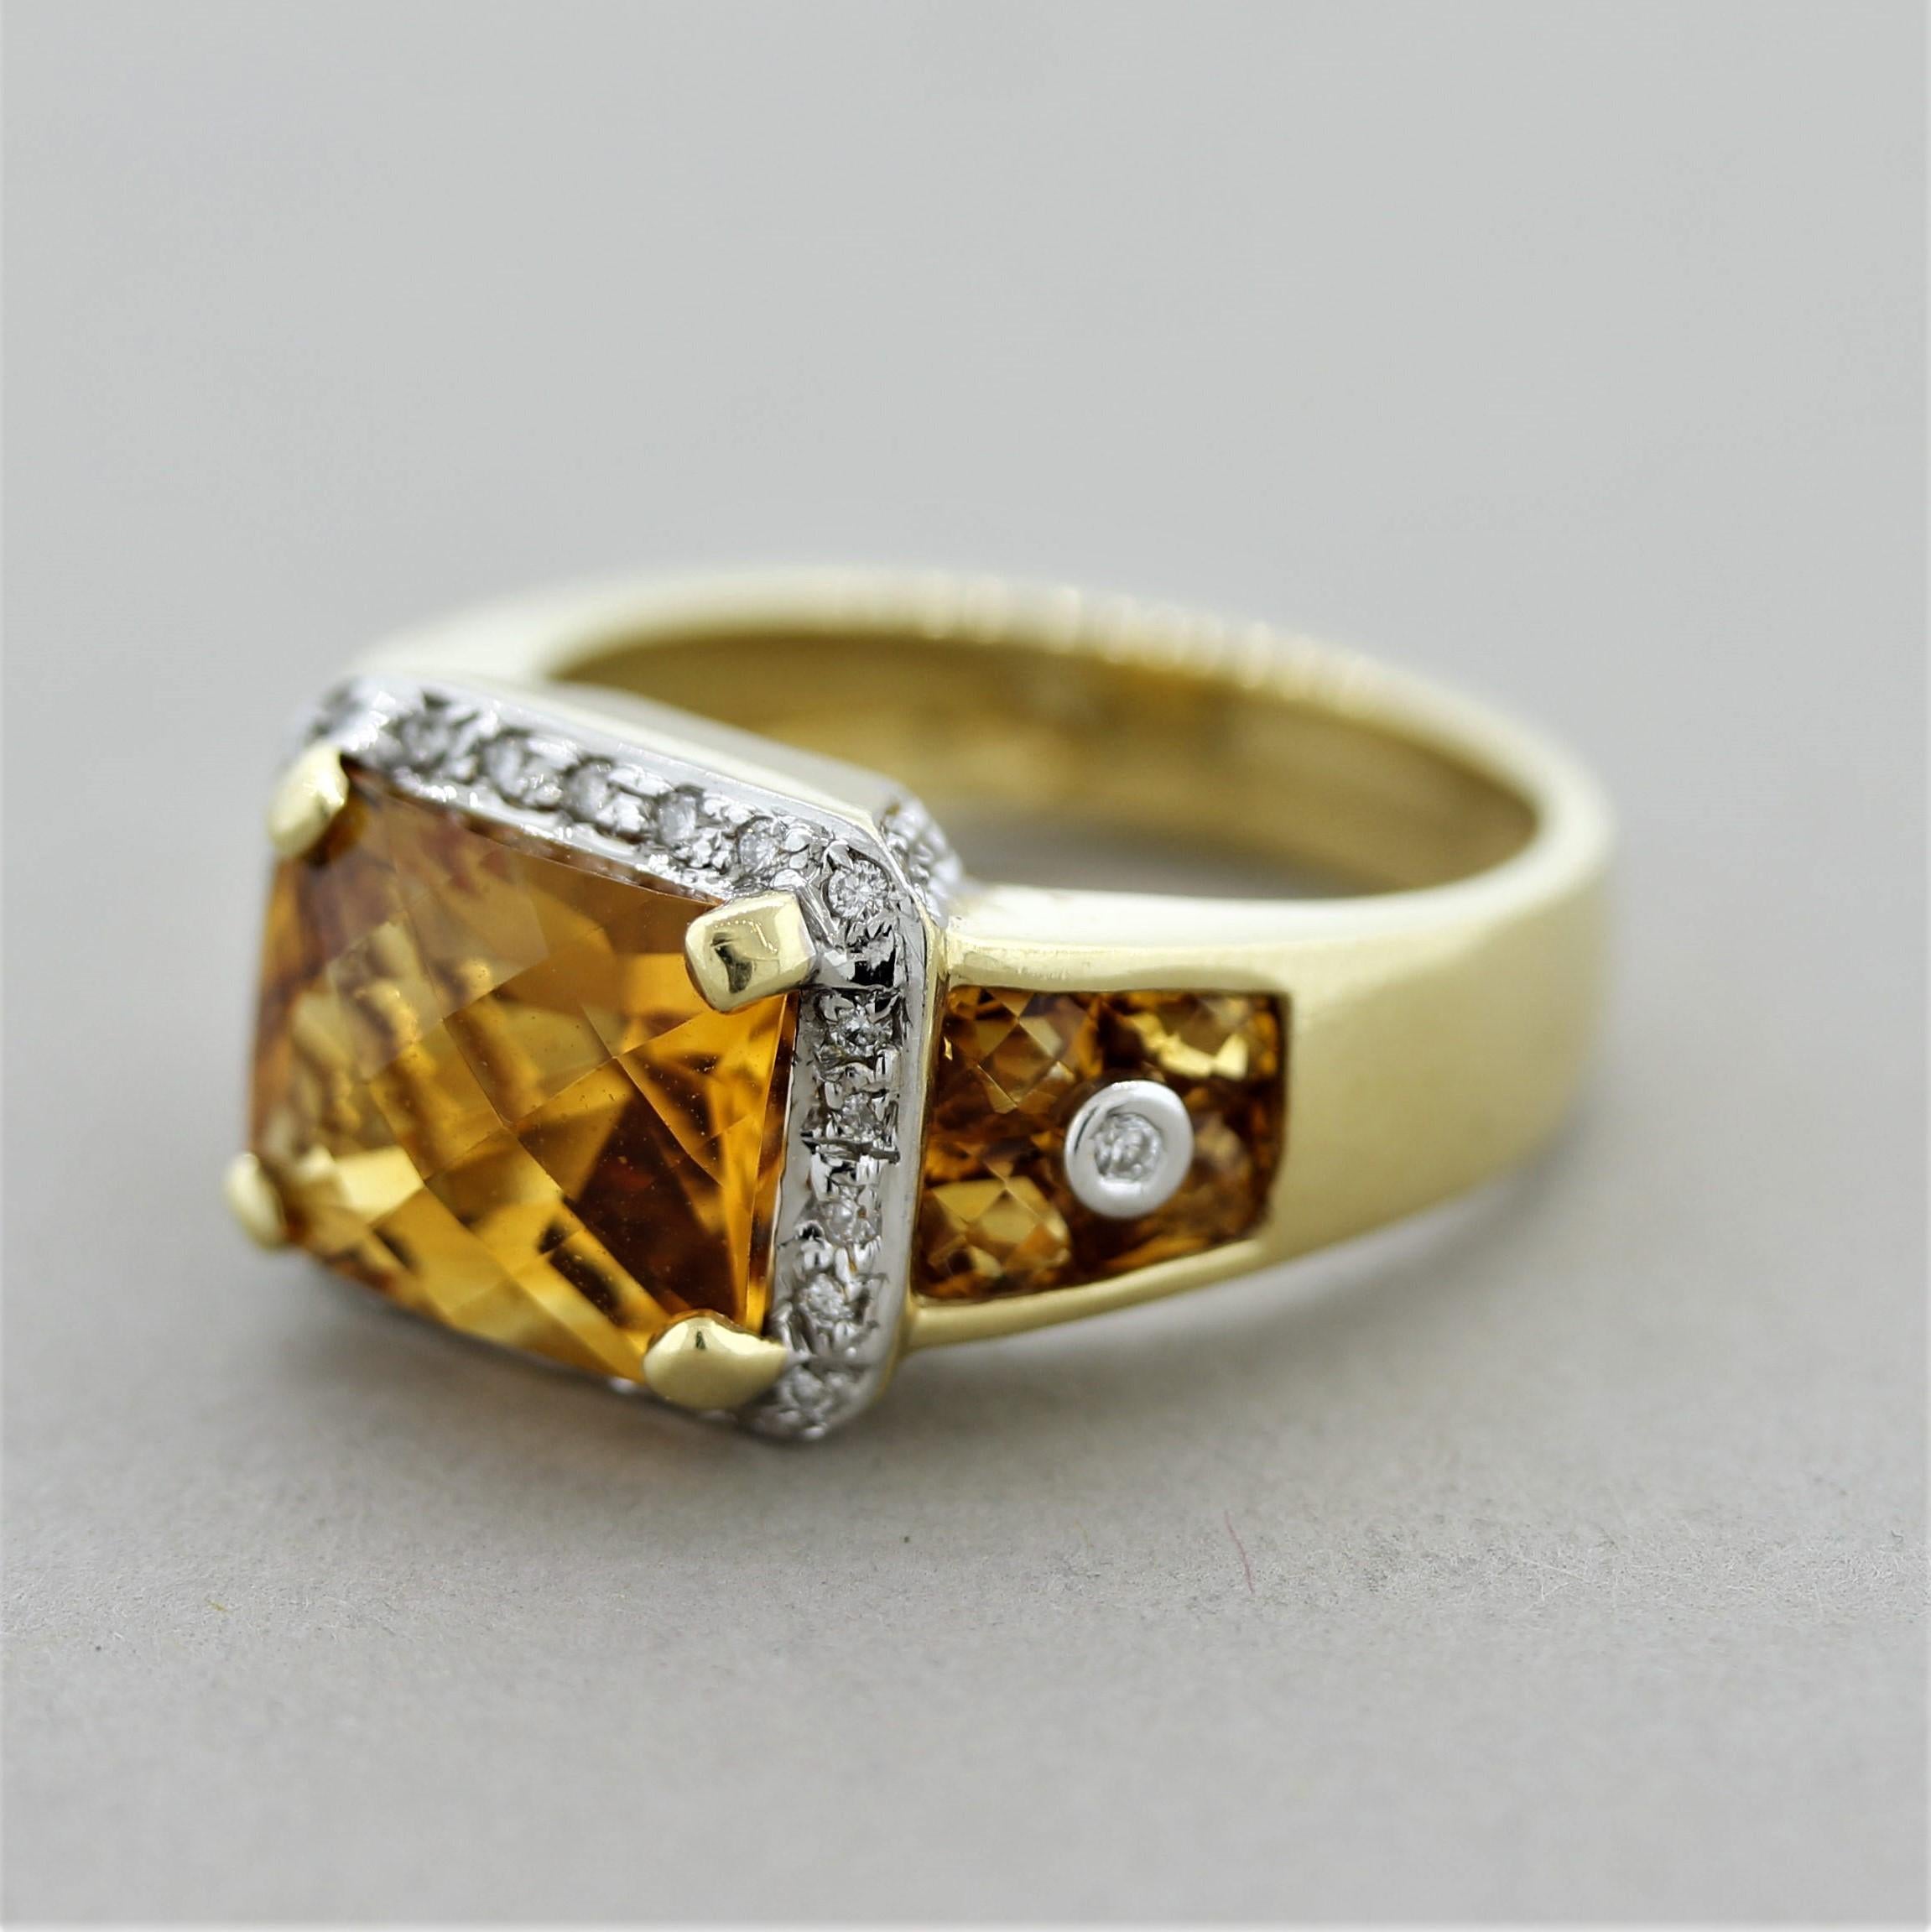 An original piece by Bellarri, this ring features 4.67 carats of bright orange citrine. They are rose-cut and are accented by 0.21 carats of round brilliant-cut diamonds. Made in 18k yellow gold and ready to be worn.

Ring Size 7 